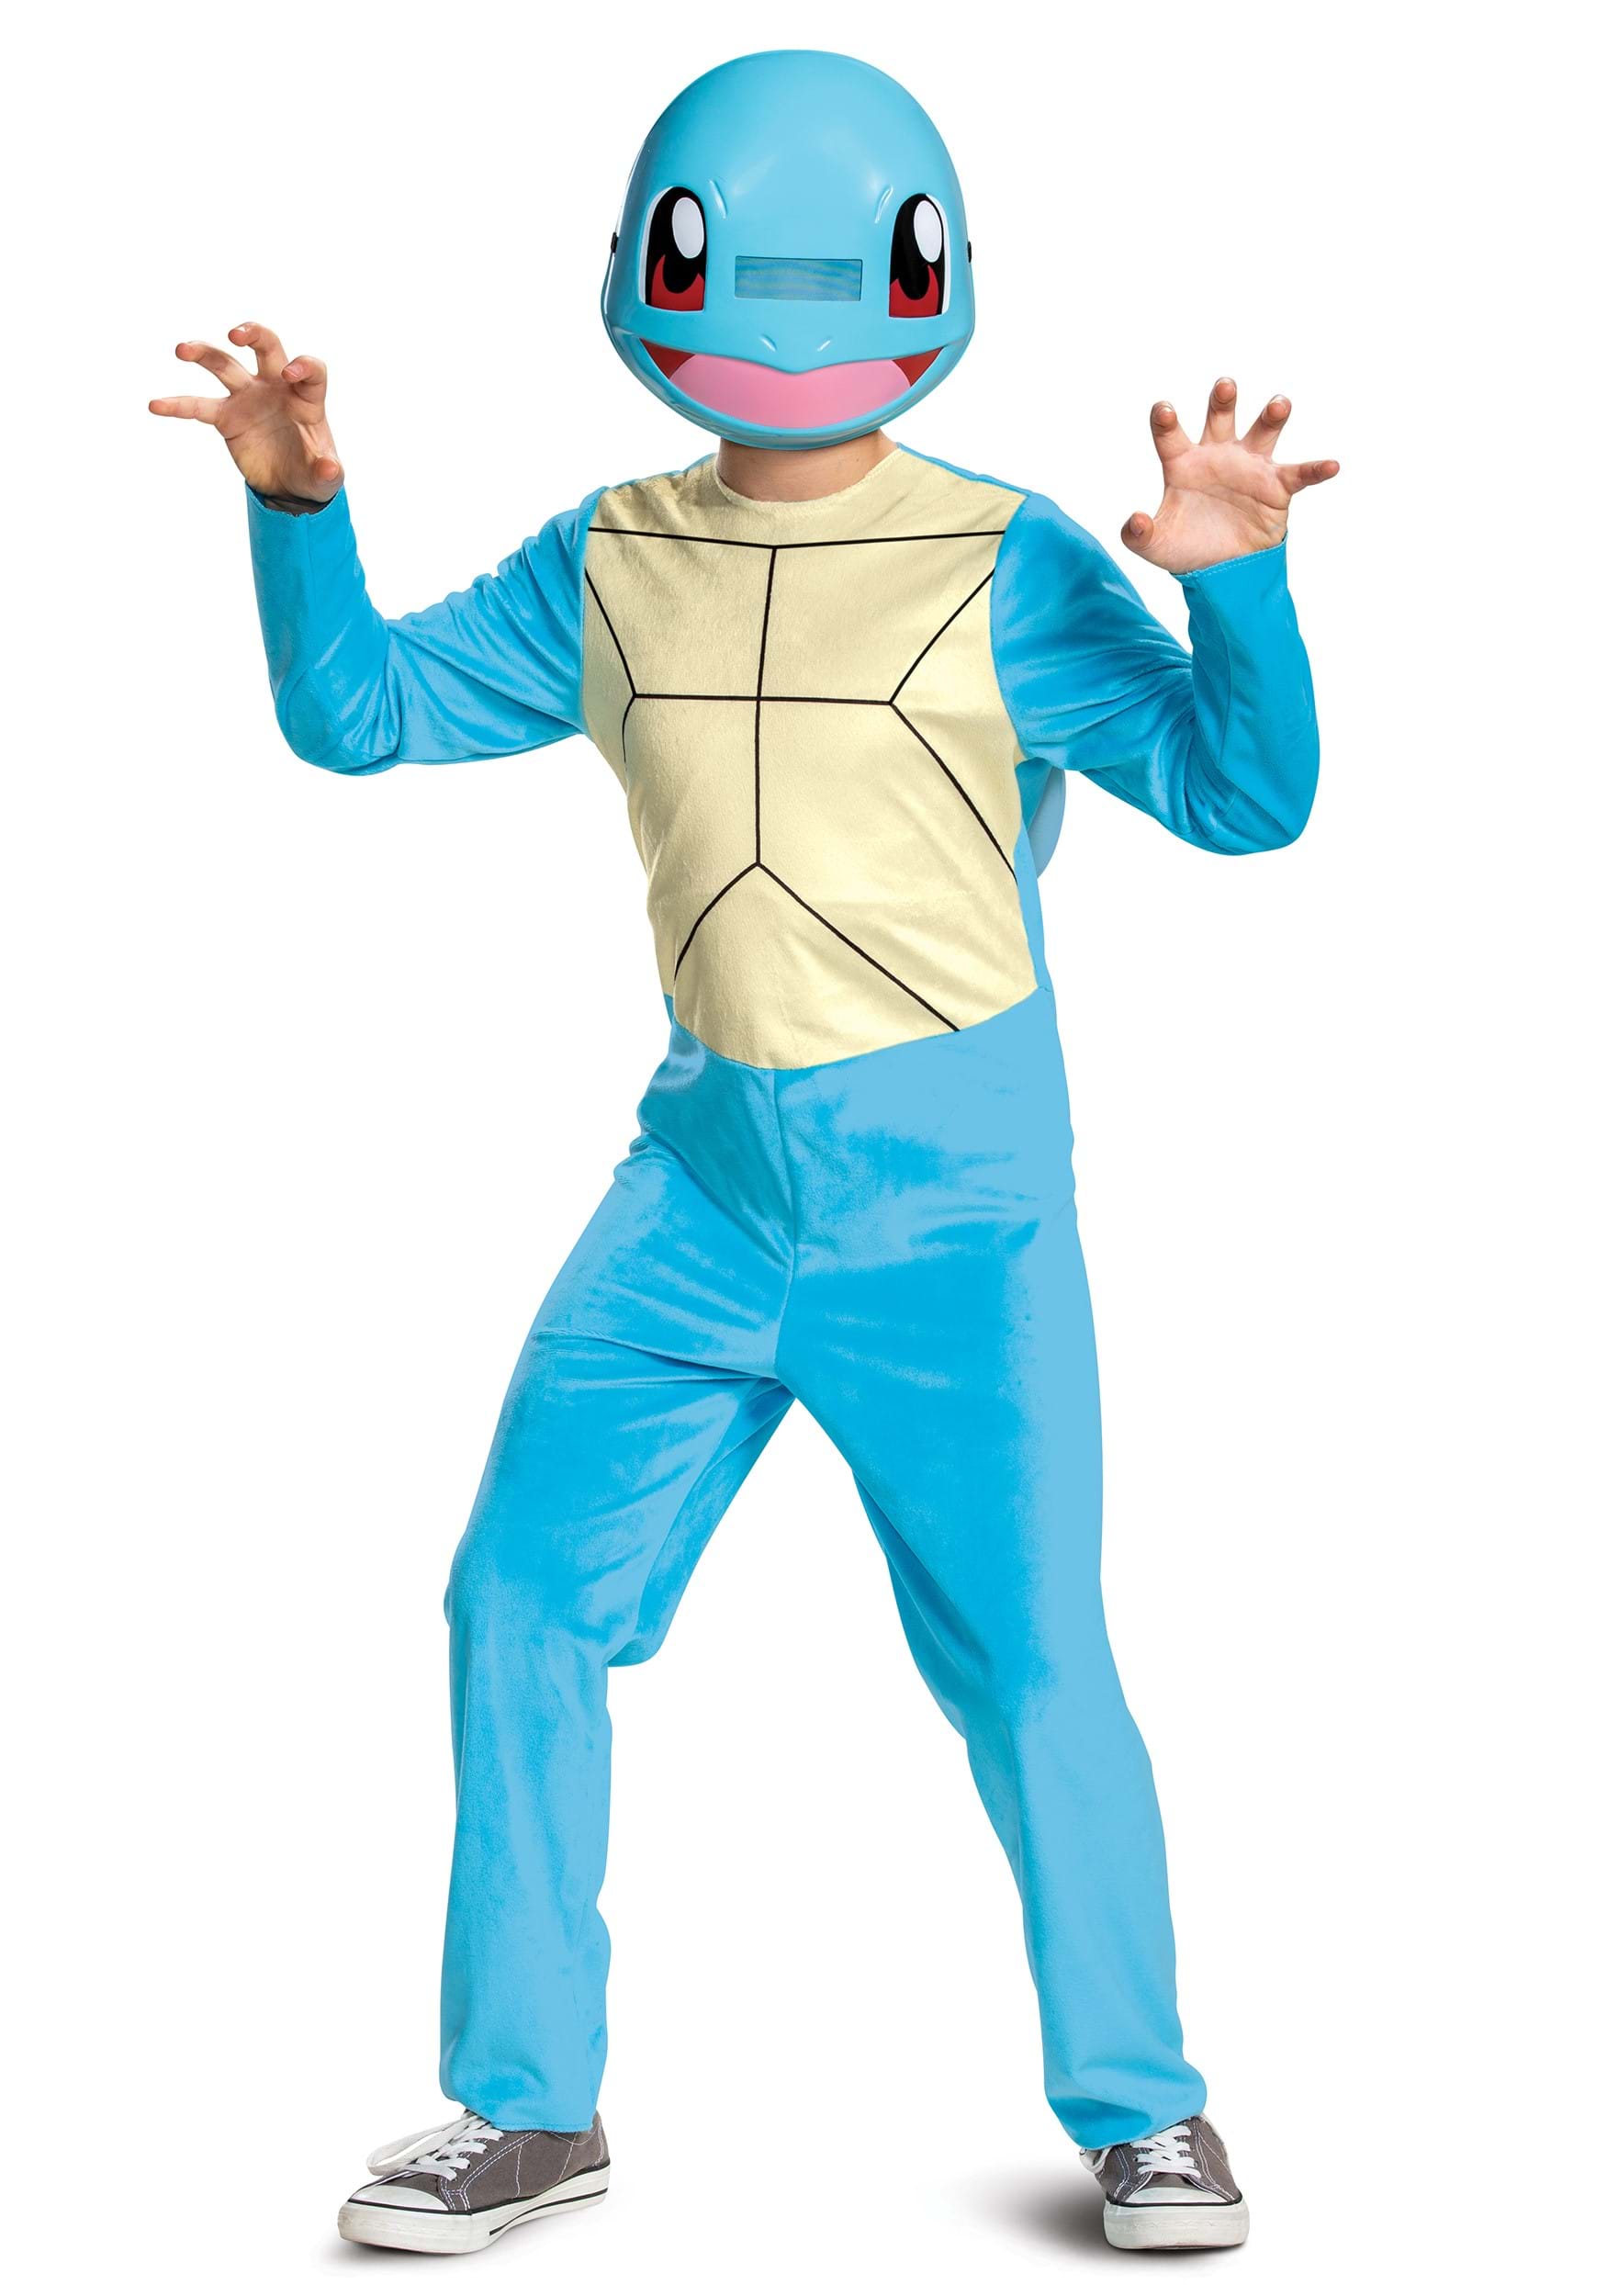 Photos - Fancy Dress Classic Disguise Pokémon  Squirtle Costume for Kids Blue/Yellow DI10544 